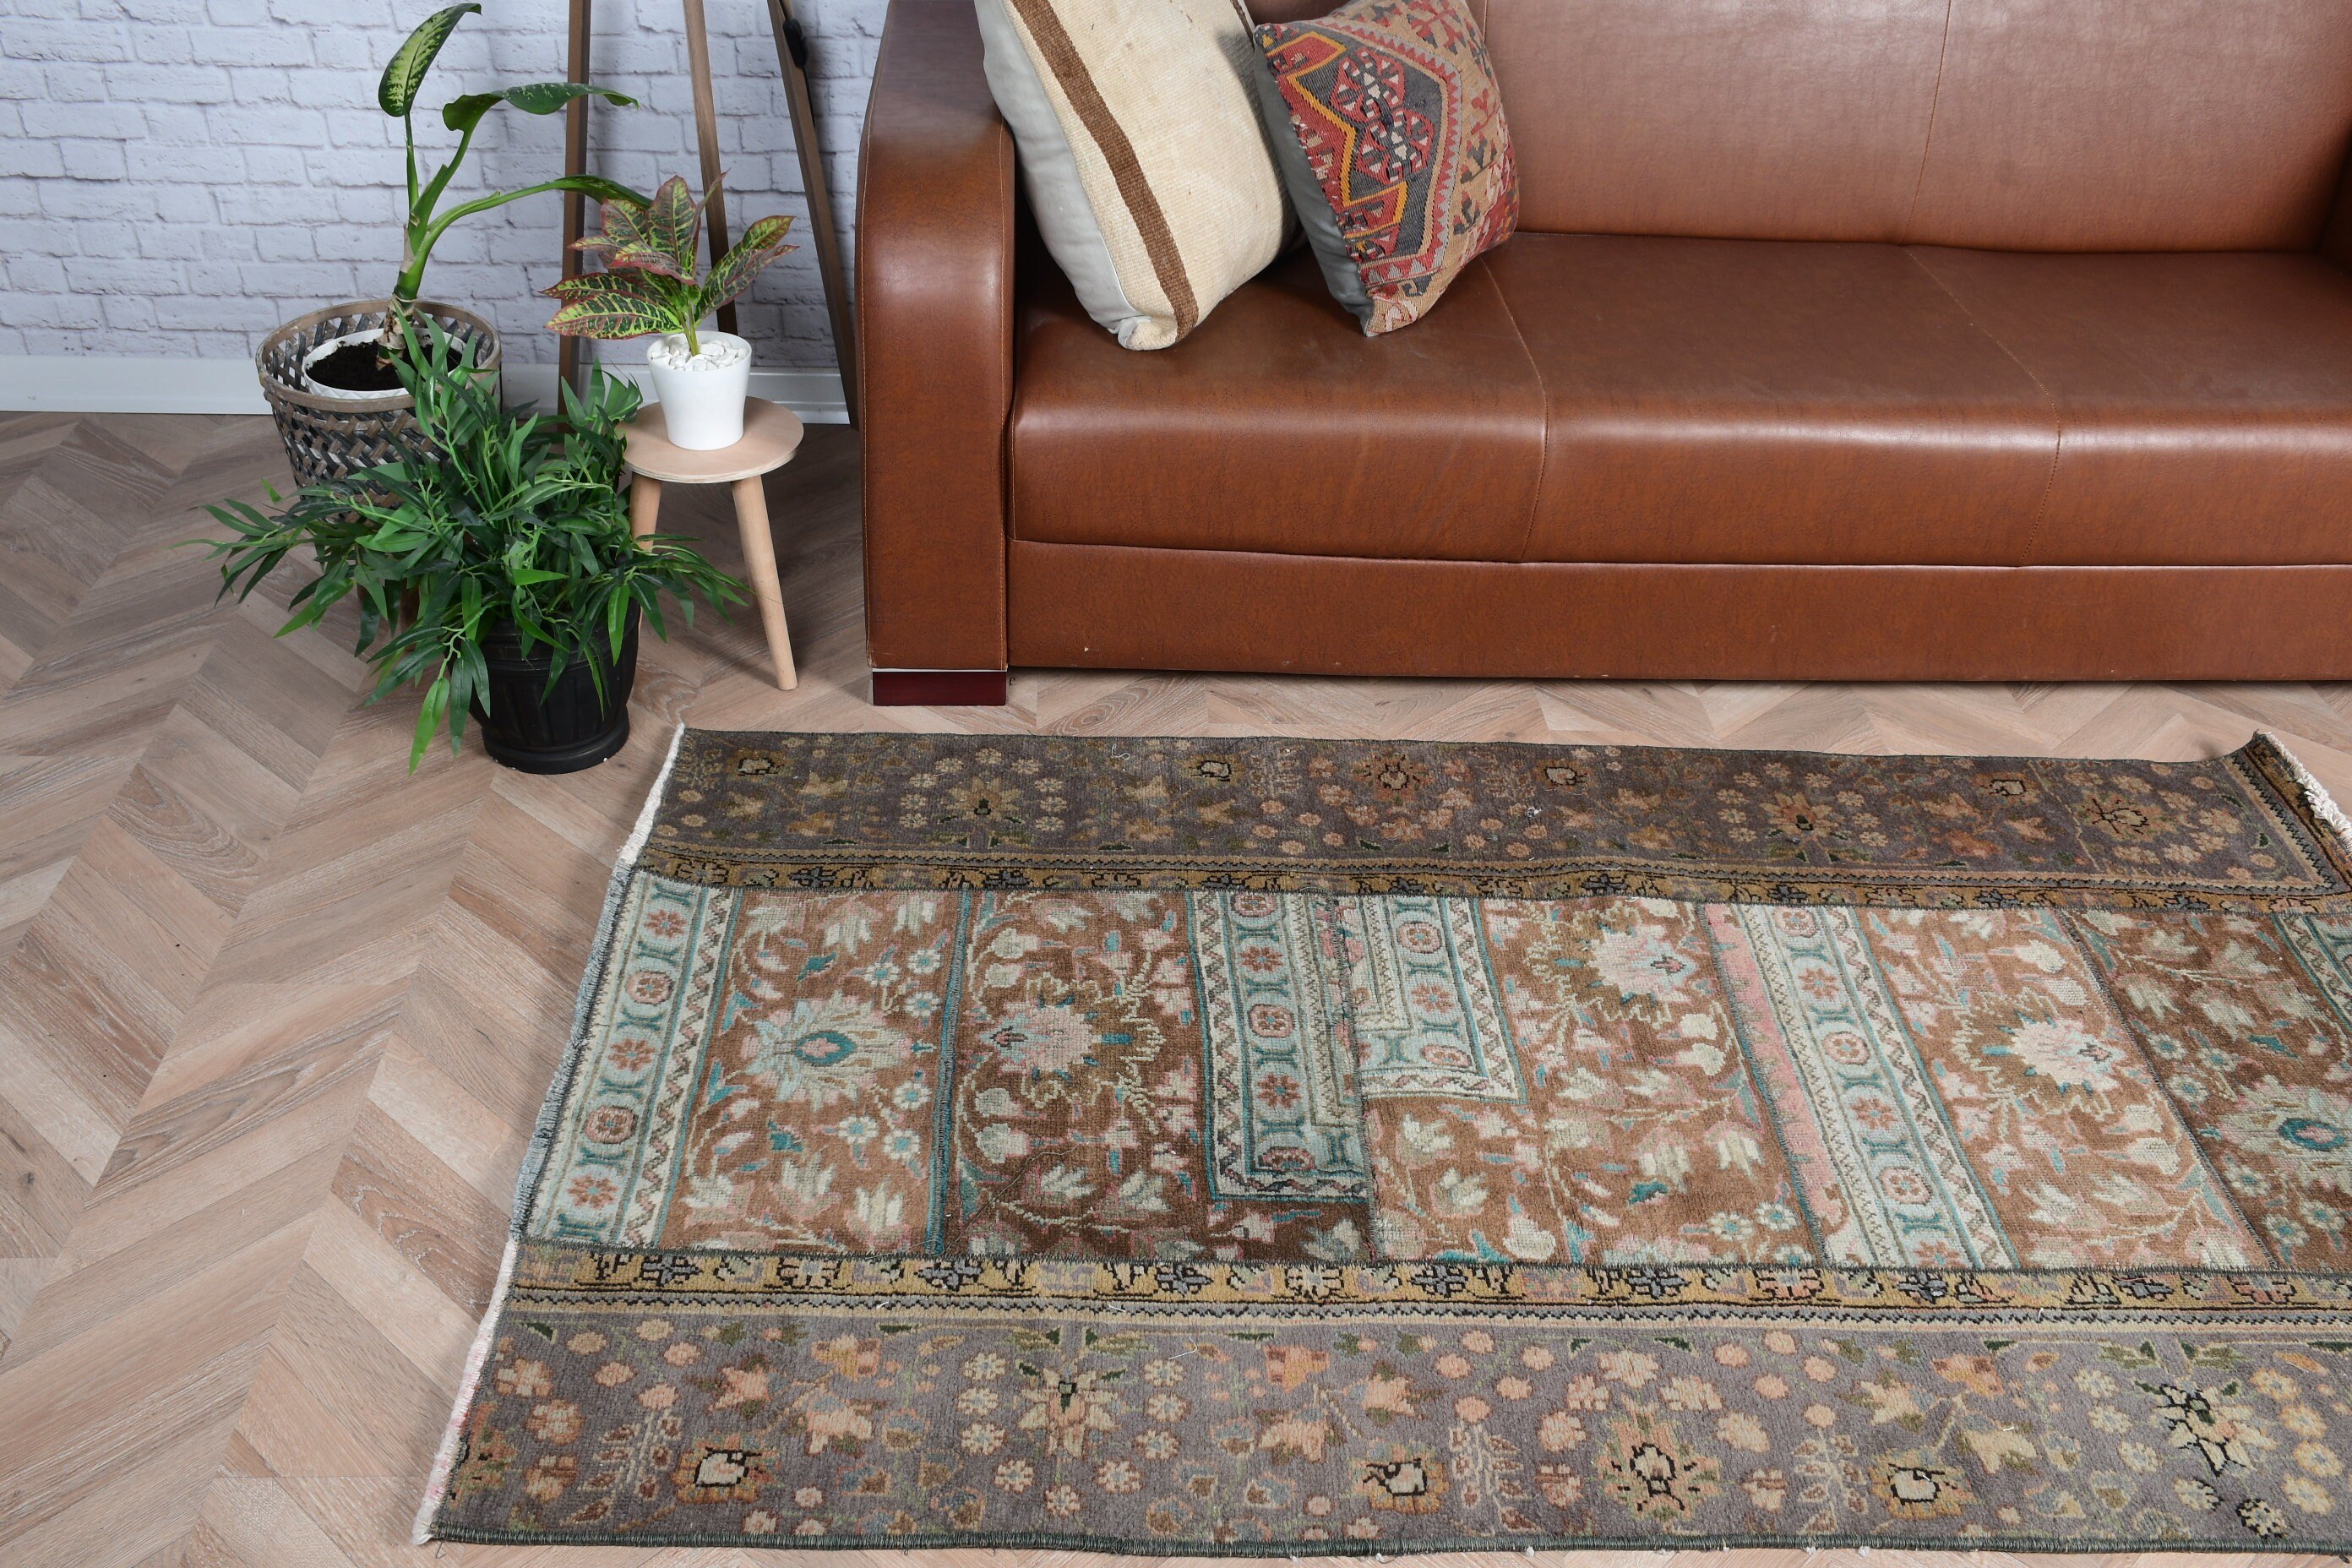 Brown Oushak Rug, Vintage Decor Rugs, Kitchen Rug, Entry Rug, 3.4x5.8 ft Accent Rugs, Cool Rug, Rugs for Kitchen, Vintage Rug, Turkish Rugs